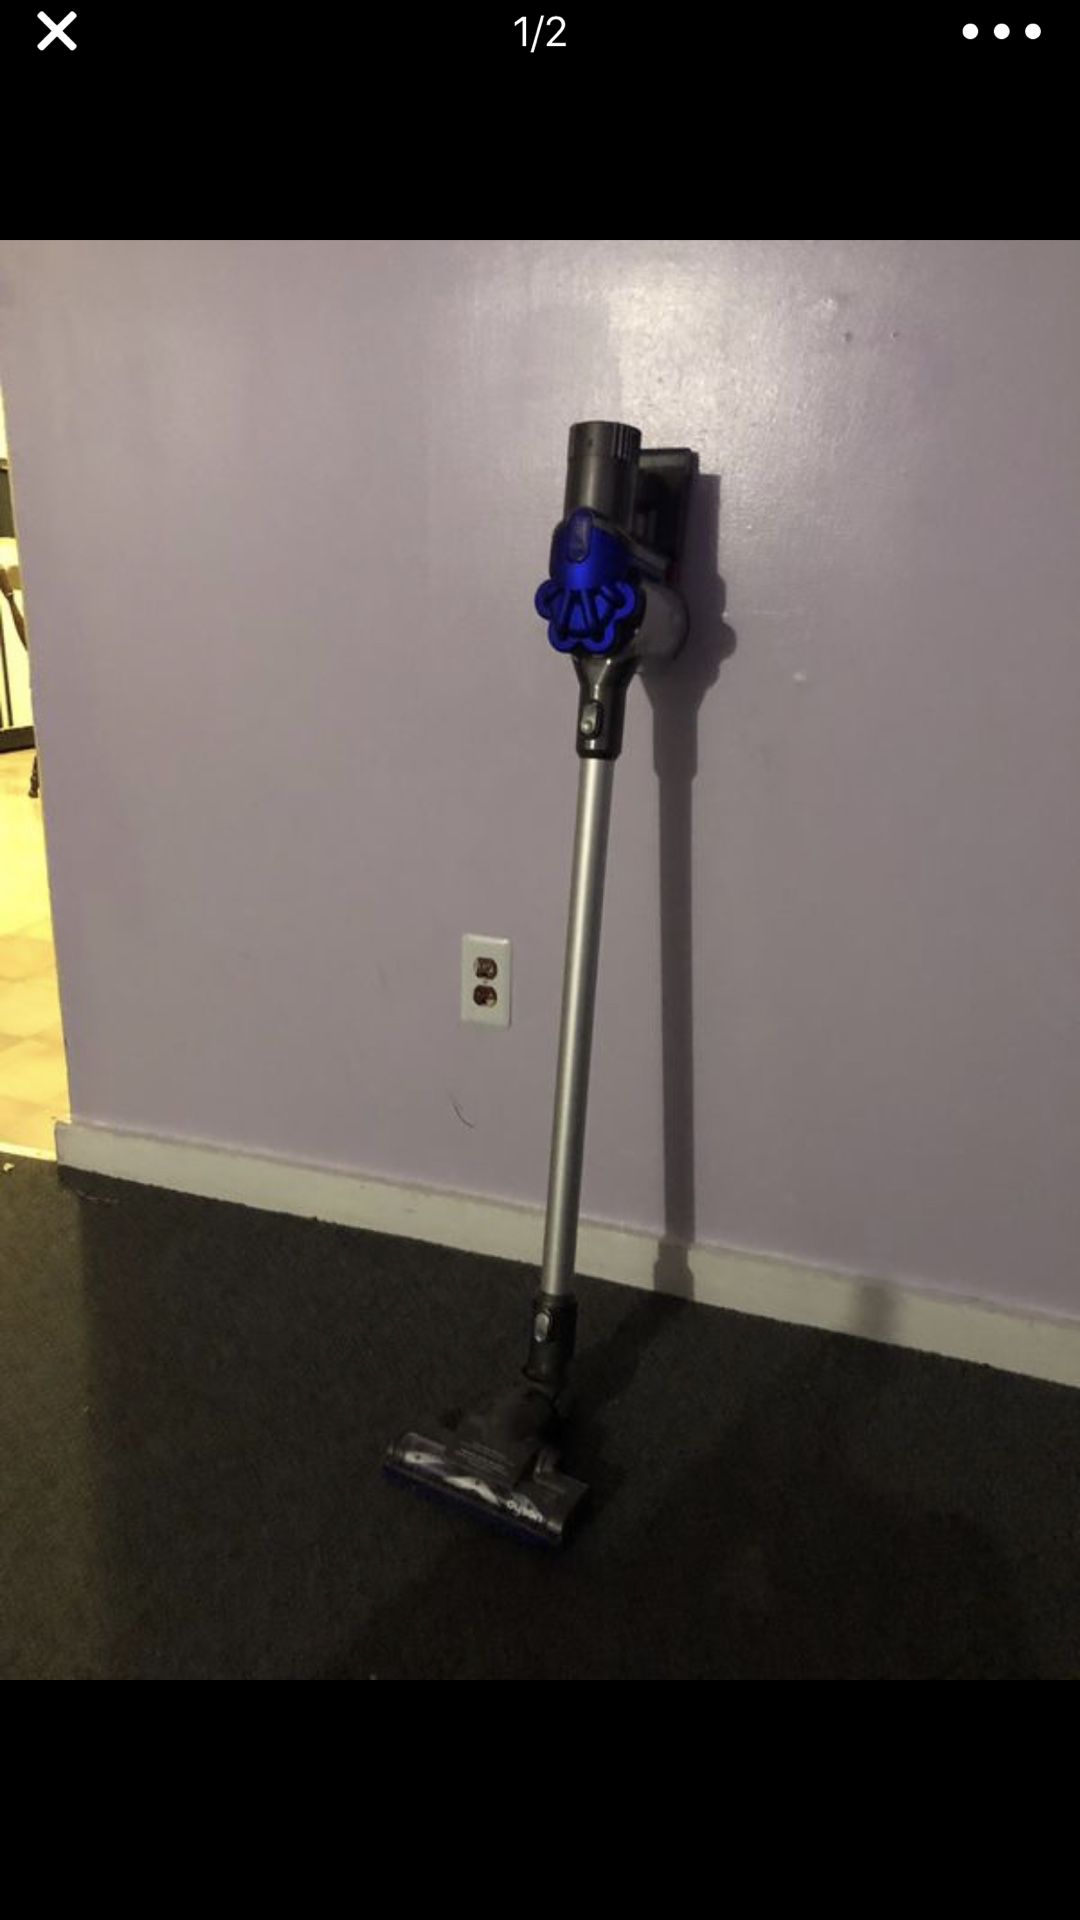 Dyson vacuum mint condition works great asking 70